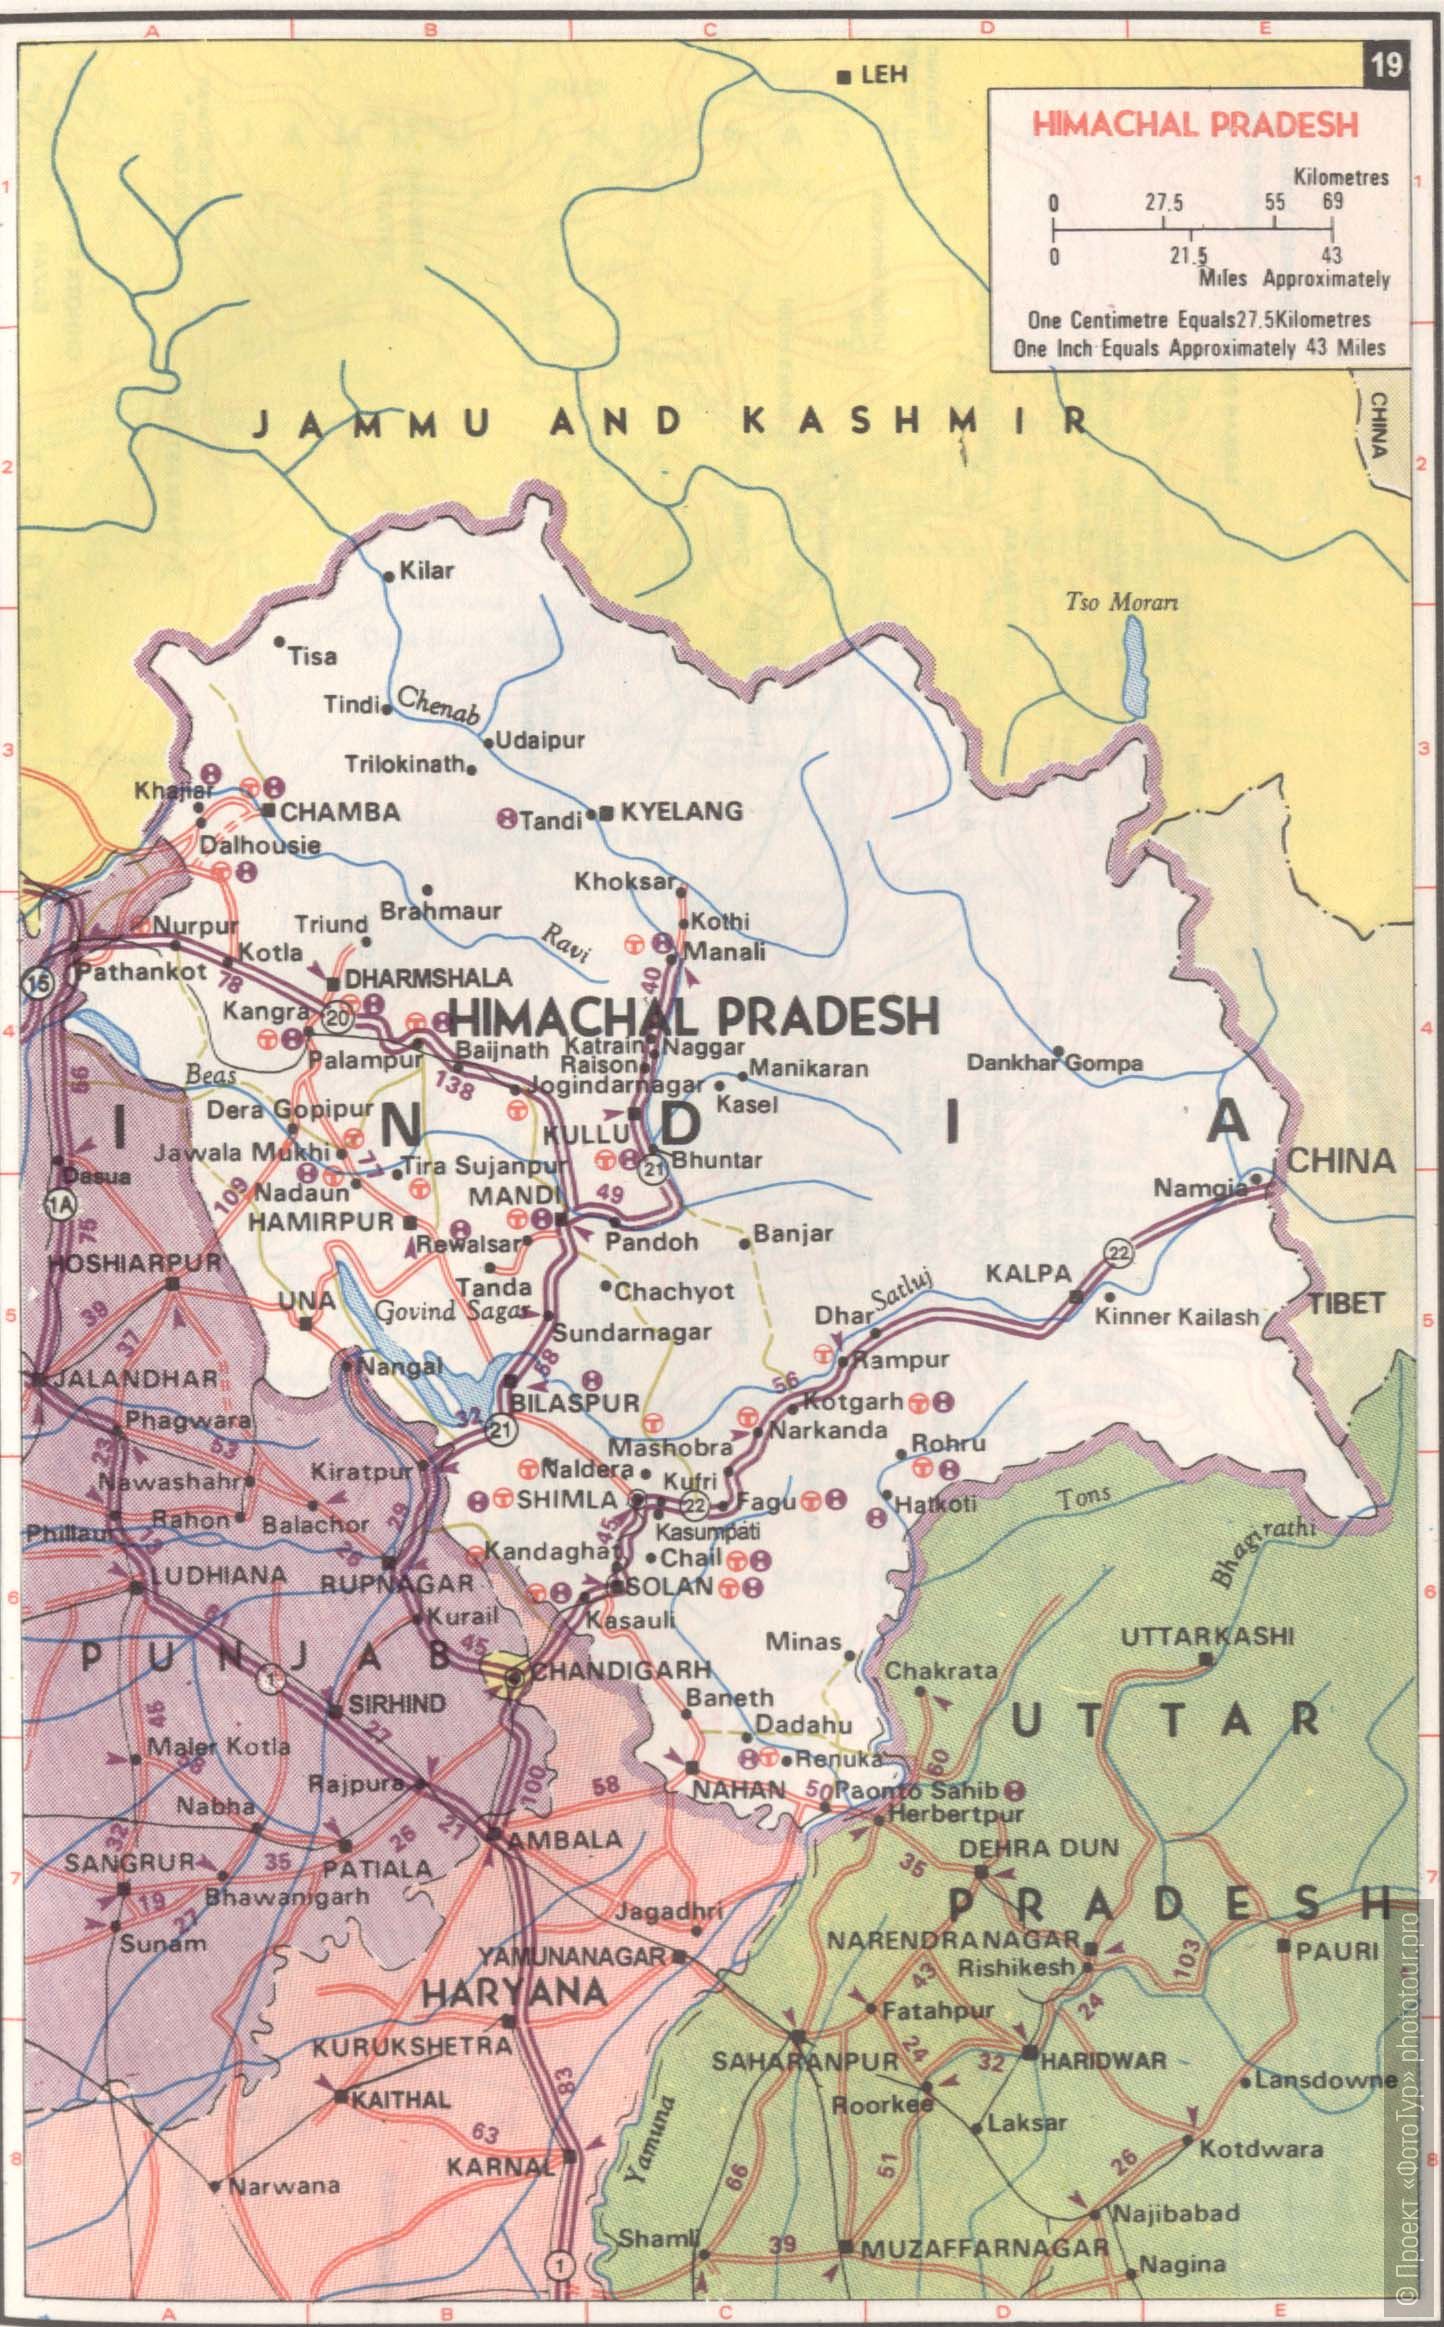     . The map of State of Himachal Pradesh.